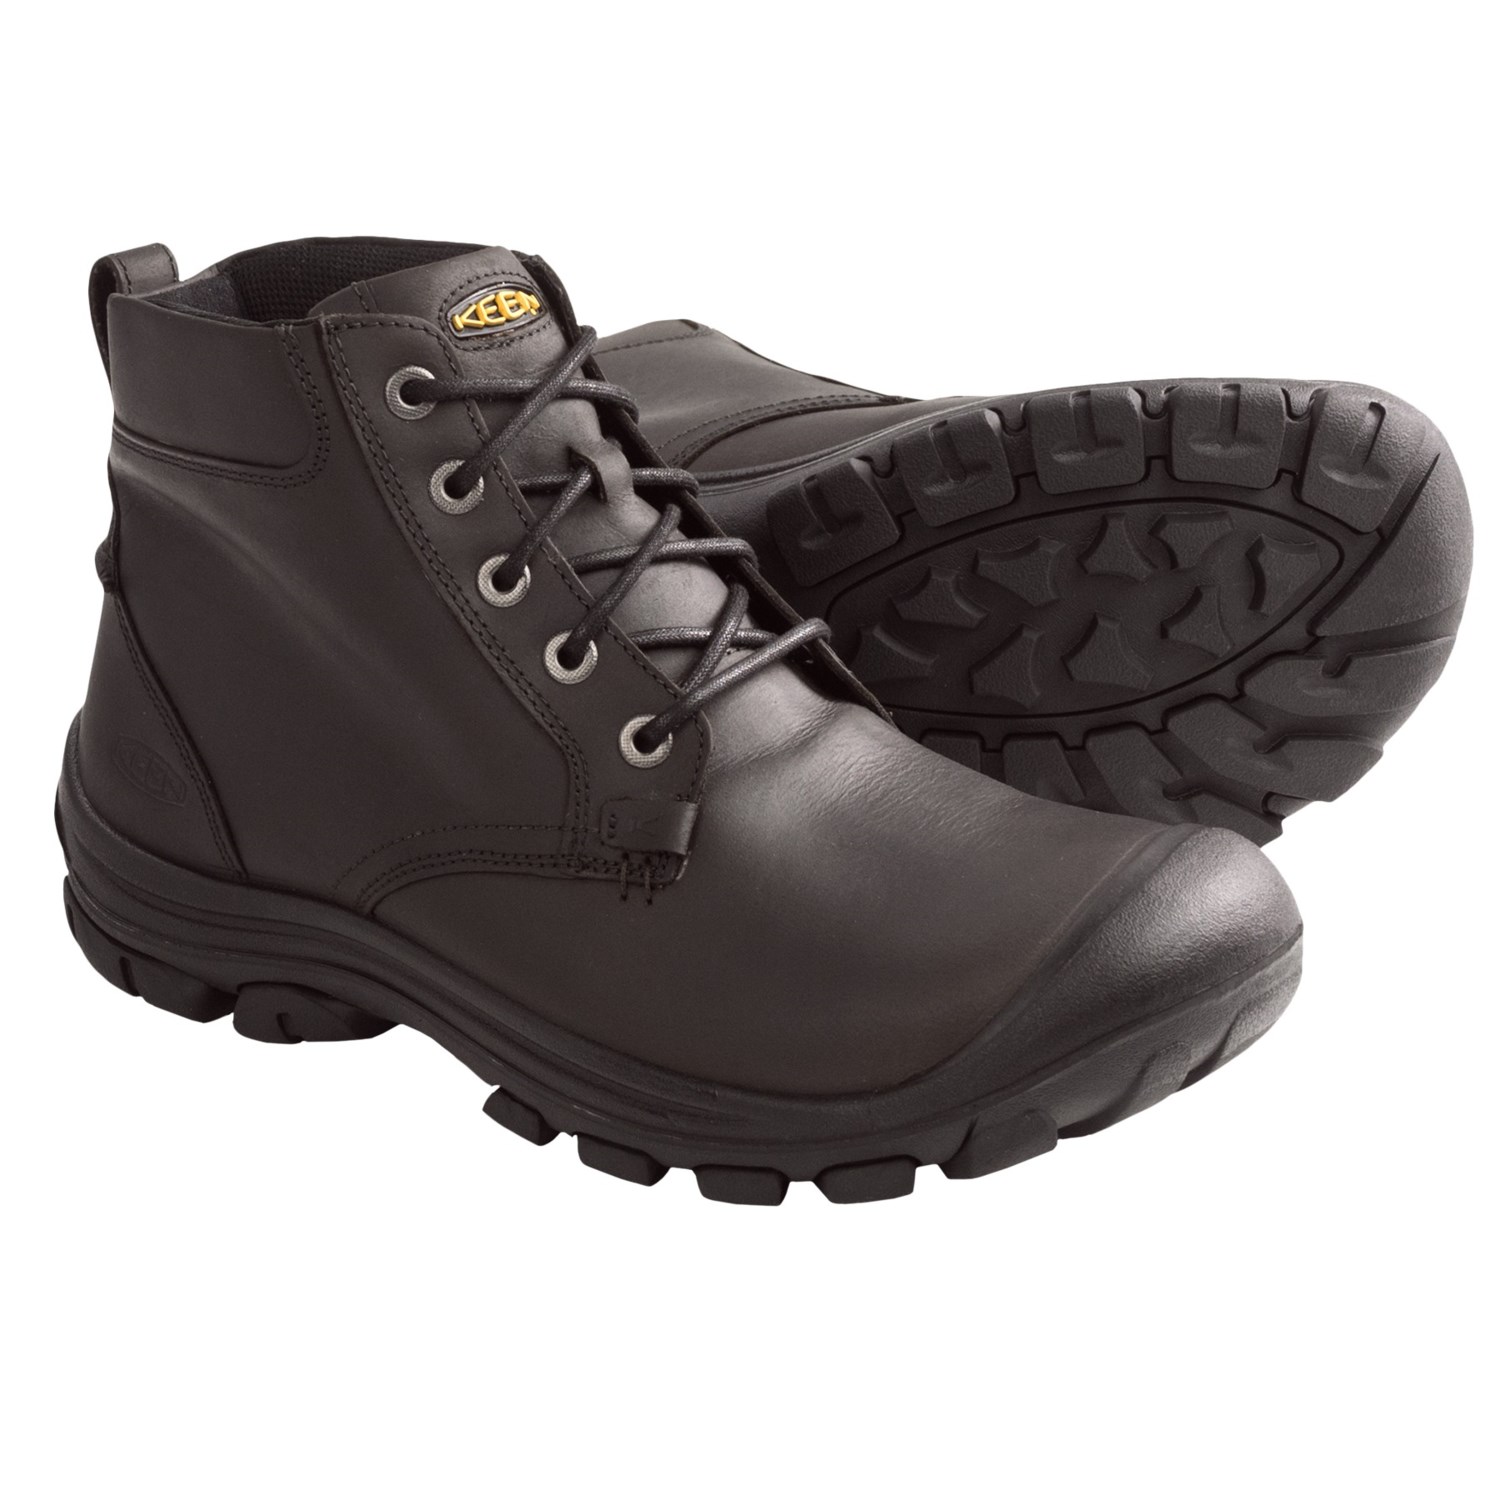 Keen Ontario Boots - Leather (For Men) in Slate Black